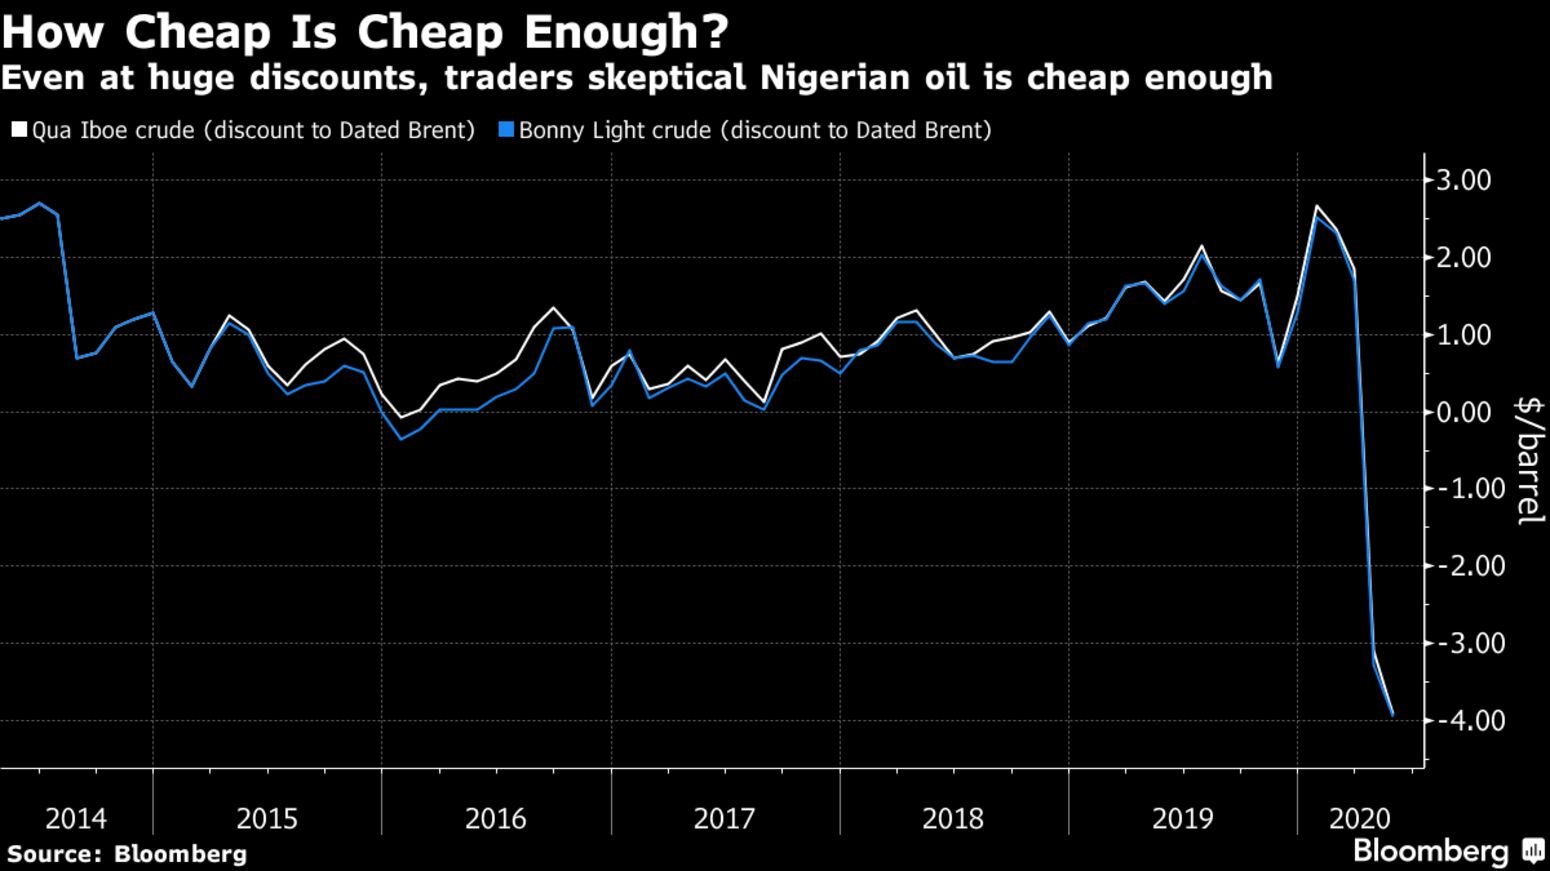 Even at huge discounts, traders skeptical Nigerian oil is cheap enough